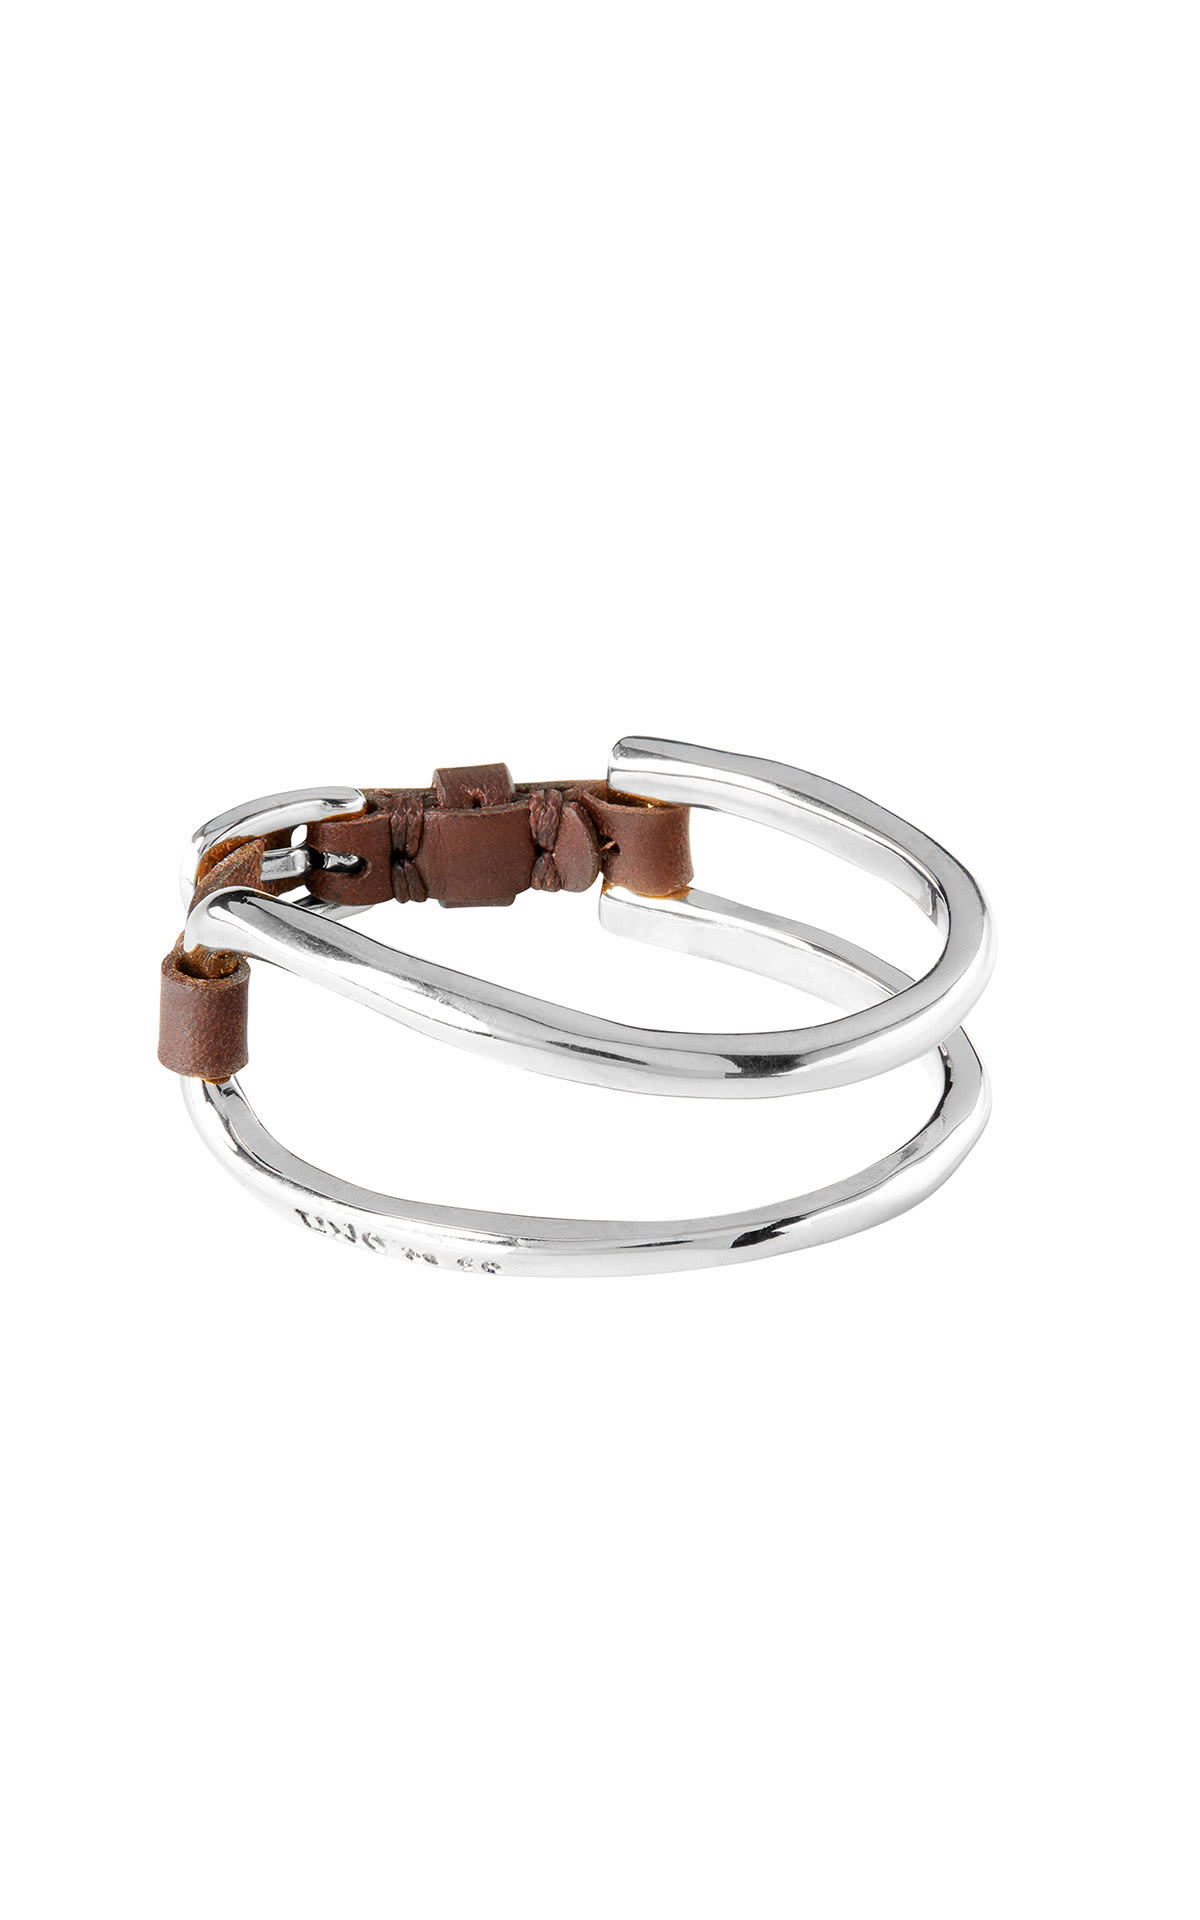 Silver and leather bracelet  UNOde50